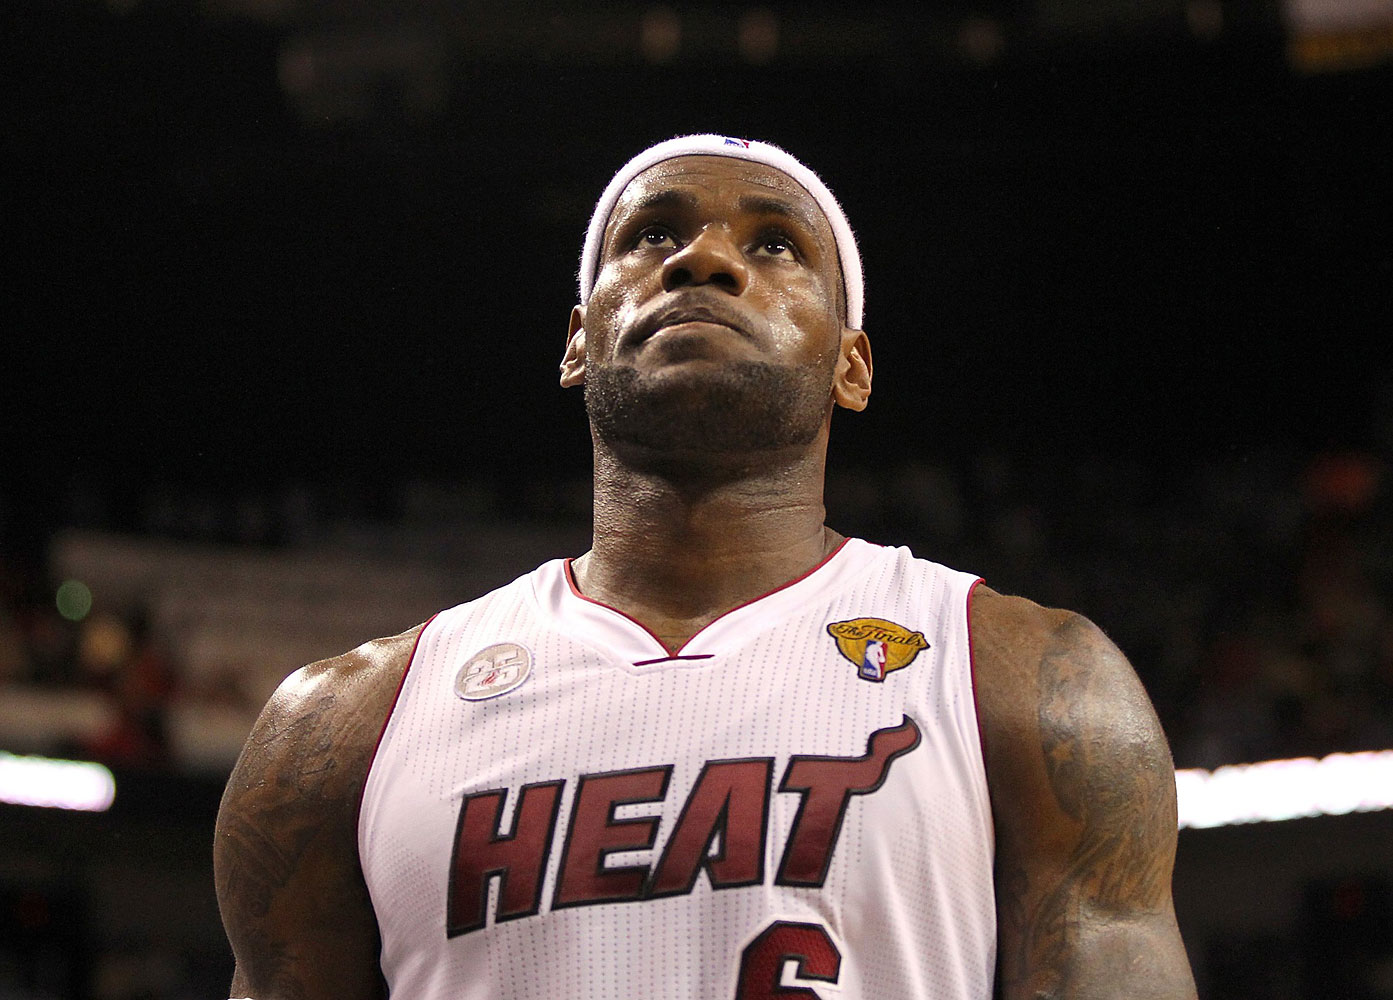 The Miami Heat's LeBron James in the second quarter against the San Antonio Spurs in Game 6 of the NBA Finals, on June 18, 2013.